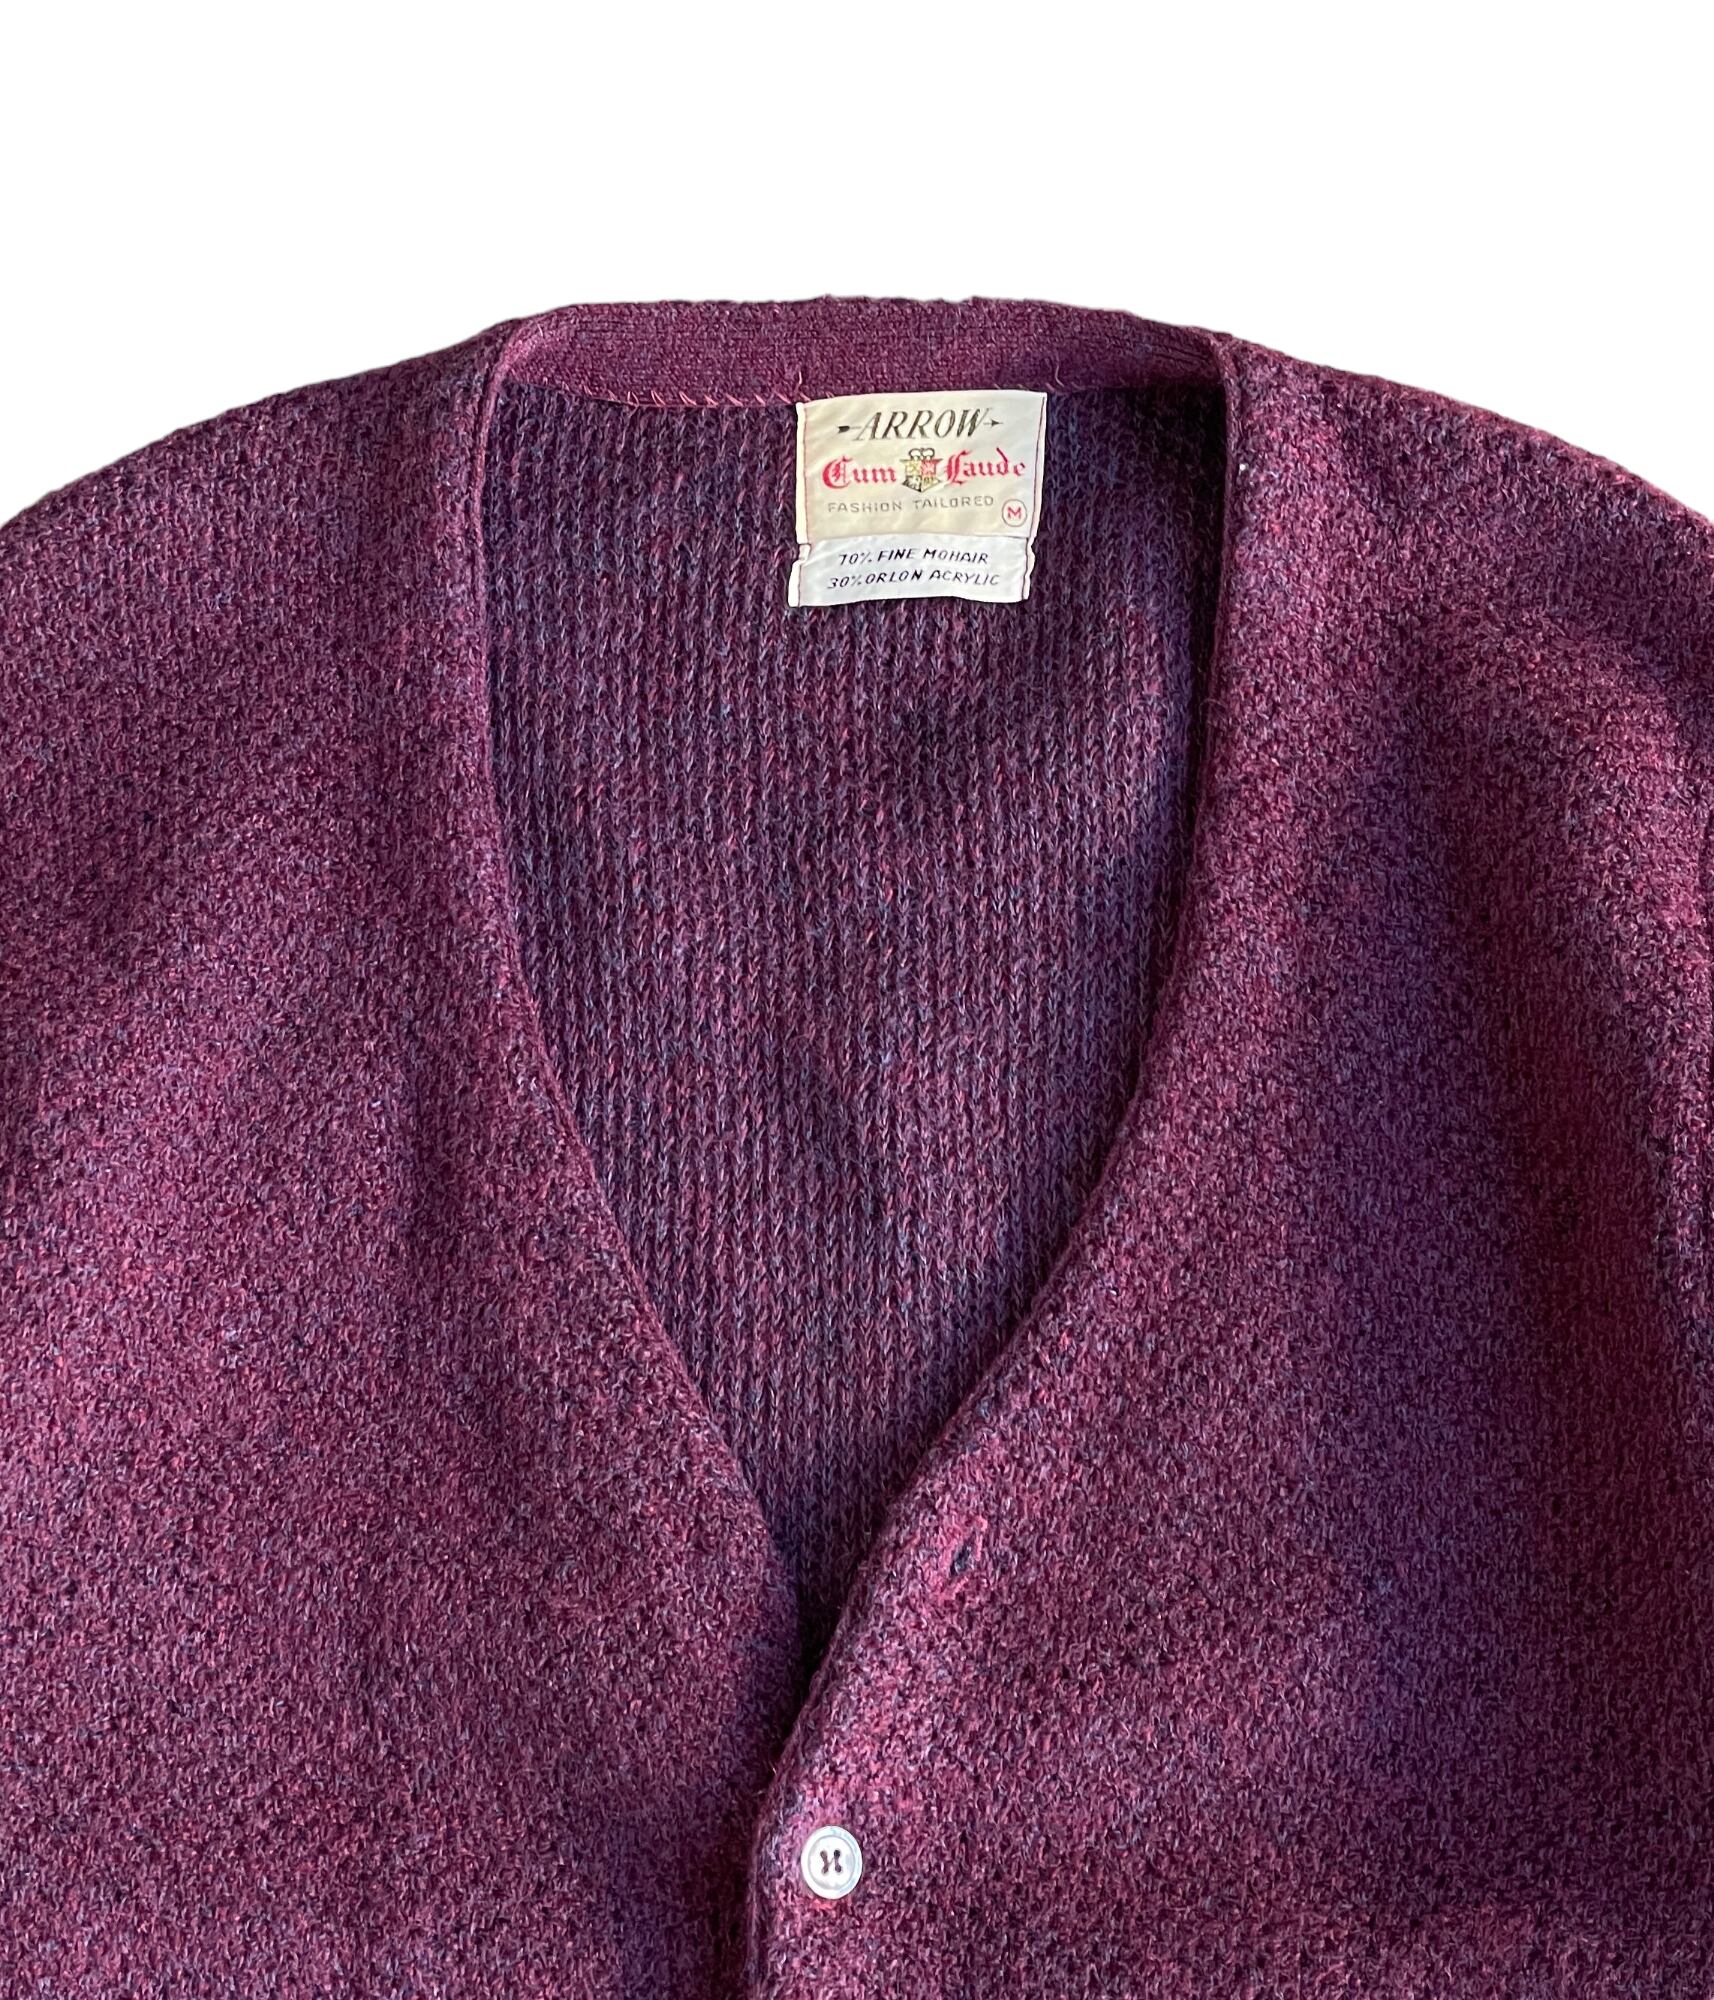 Vintage 60-70s Mohair Cardigan -Arrow- | BEGGARS BANQUET公式通販サイト　古着・ヴィンテージ